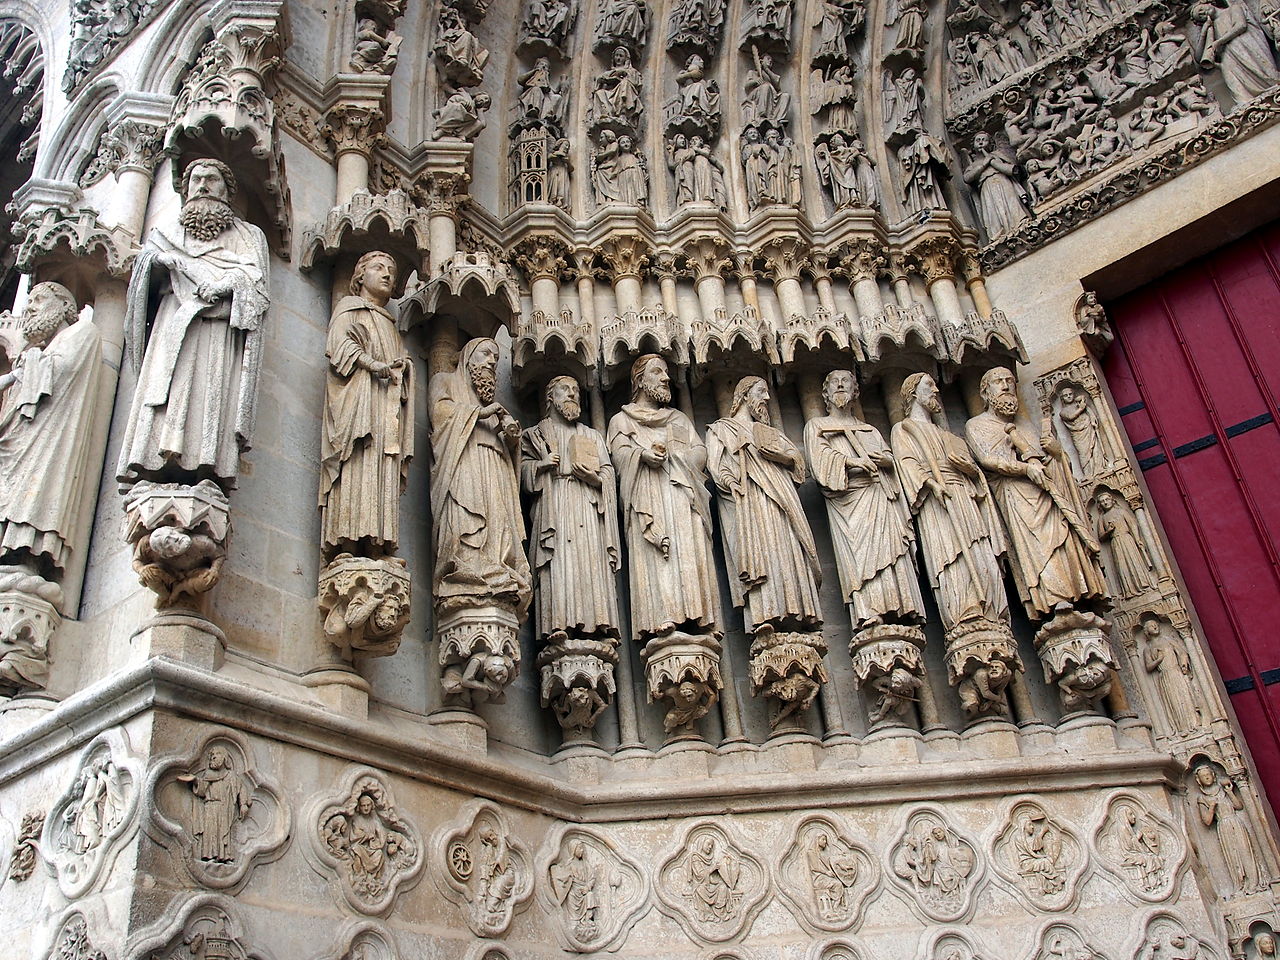 1280px-Statues_of_Amiens_Cathedral,_pic5.jpeg